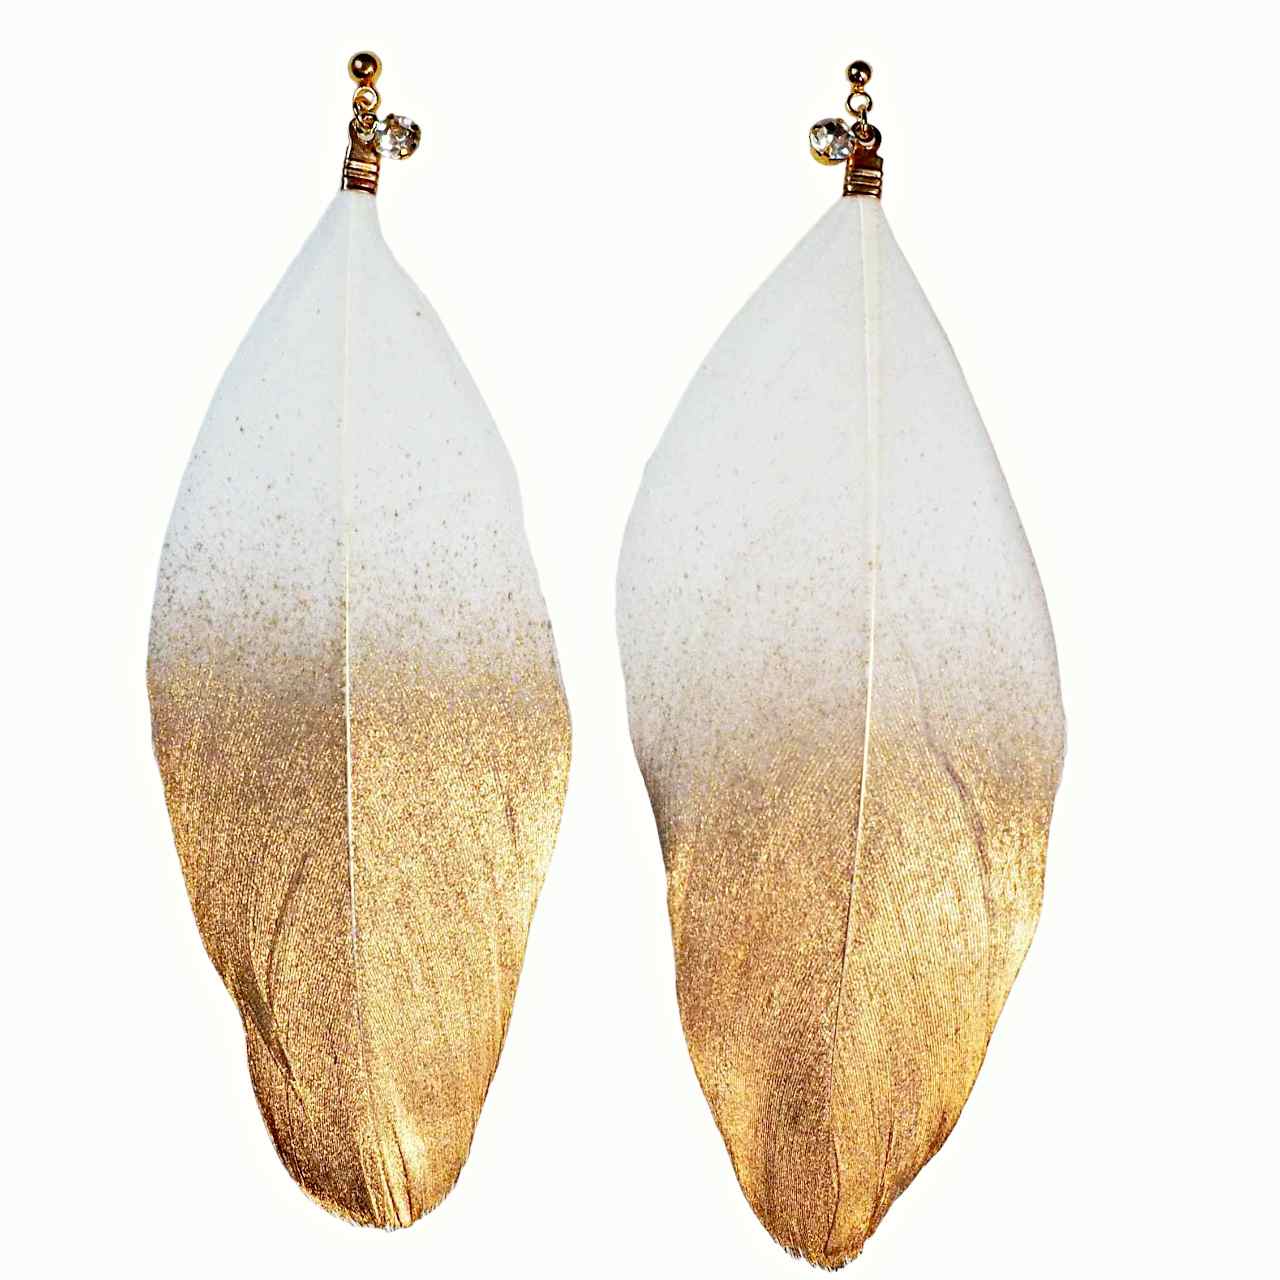 Dangle Feather Invisible Clip On Earrings ( White, Pink, Green, Black, White & Gold, Black & Silver)